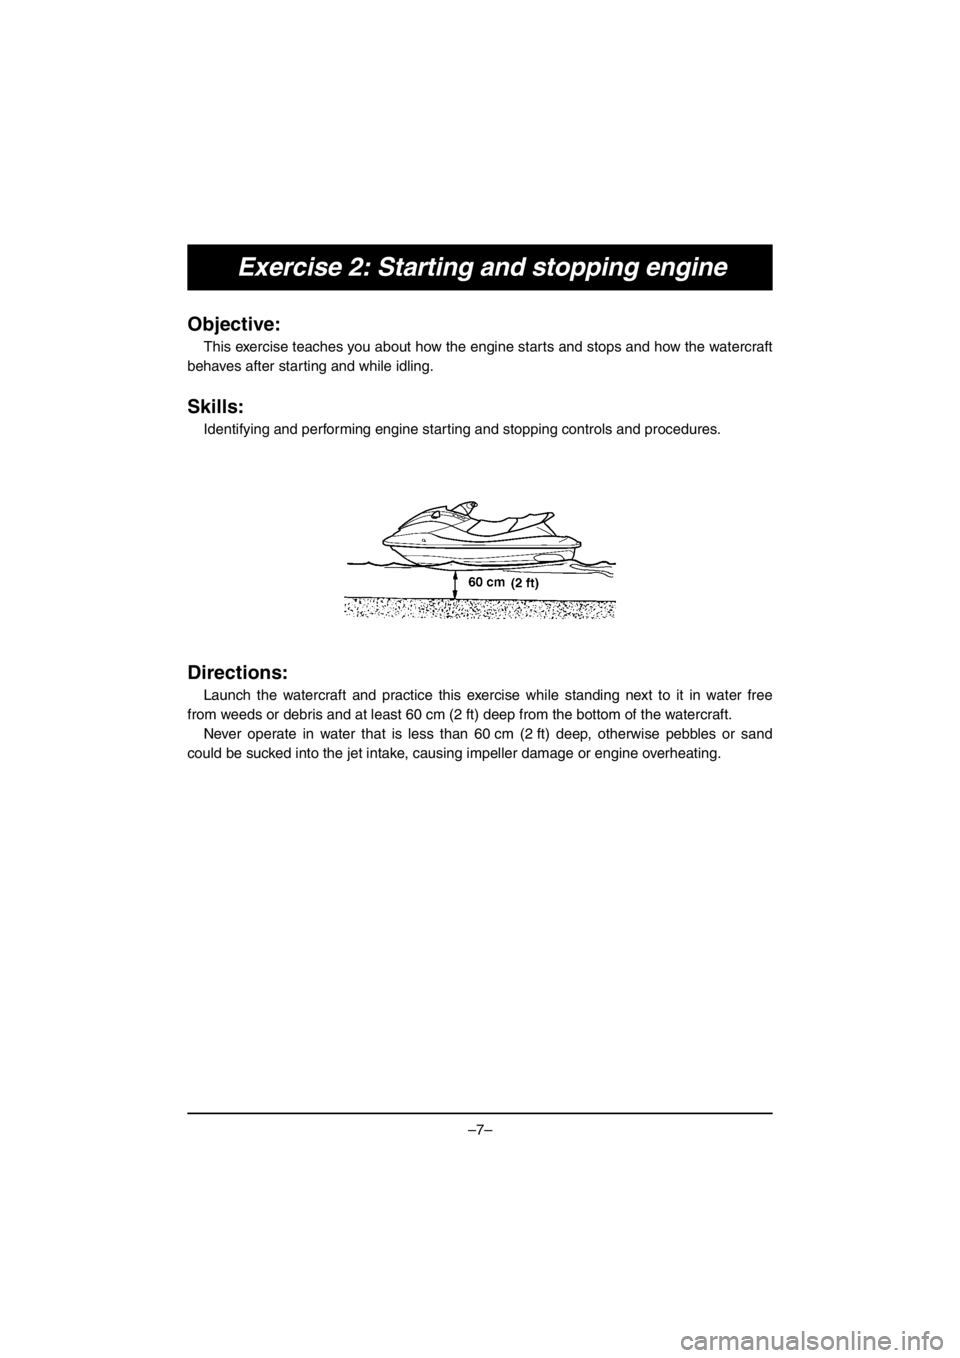 YAMAHA EX SPORT 2017  Manuale duso (in Italian) –7–
Exercise 2: Starting and stopping engine
Objective:
This exercise teaches you about how the engine starts and stops and how the watercraft
behaves after starting and while idling.
Skills:
Iden